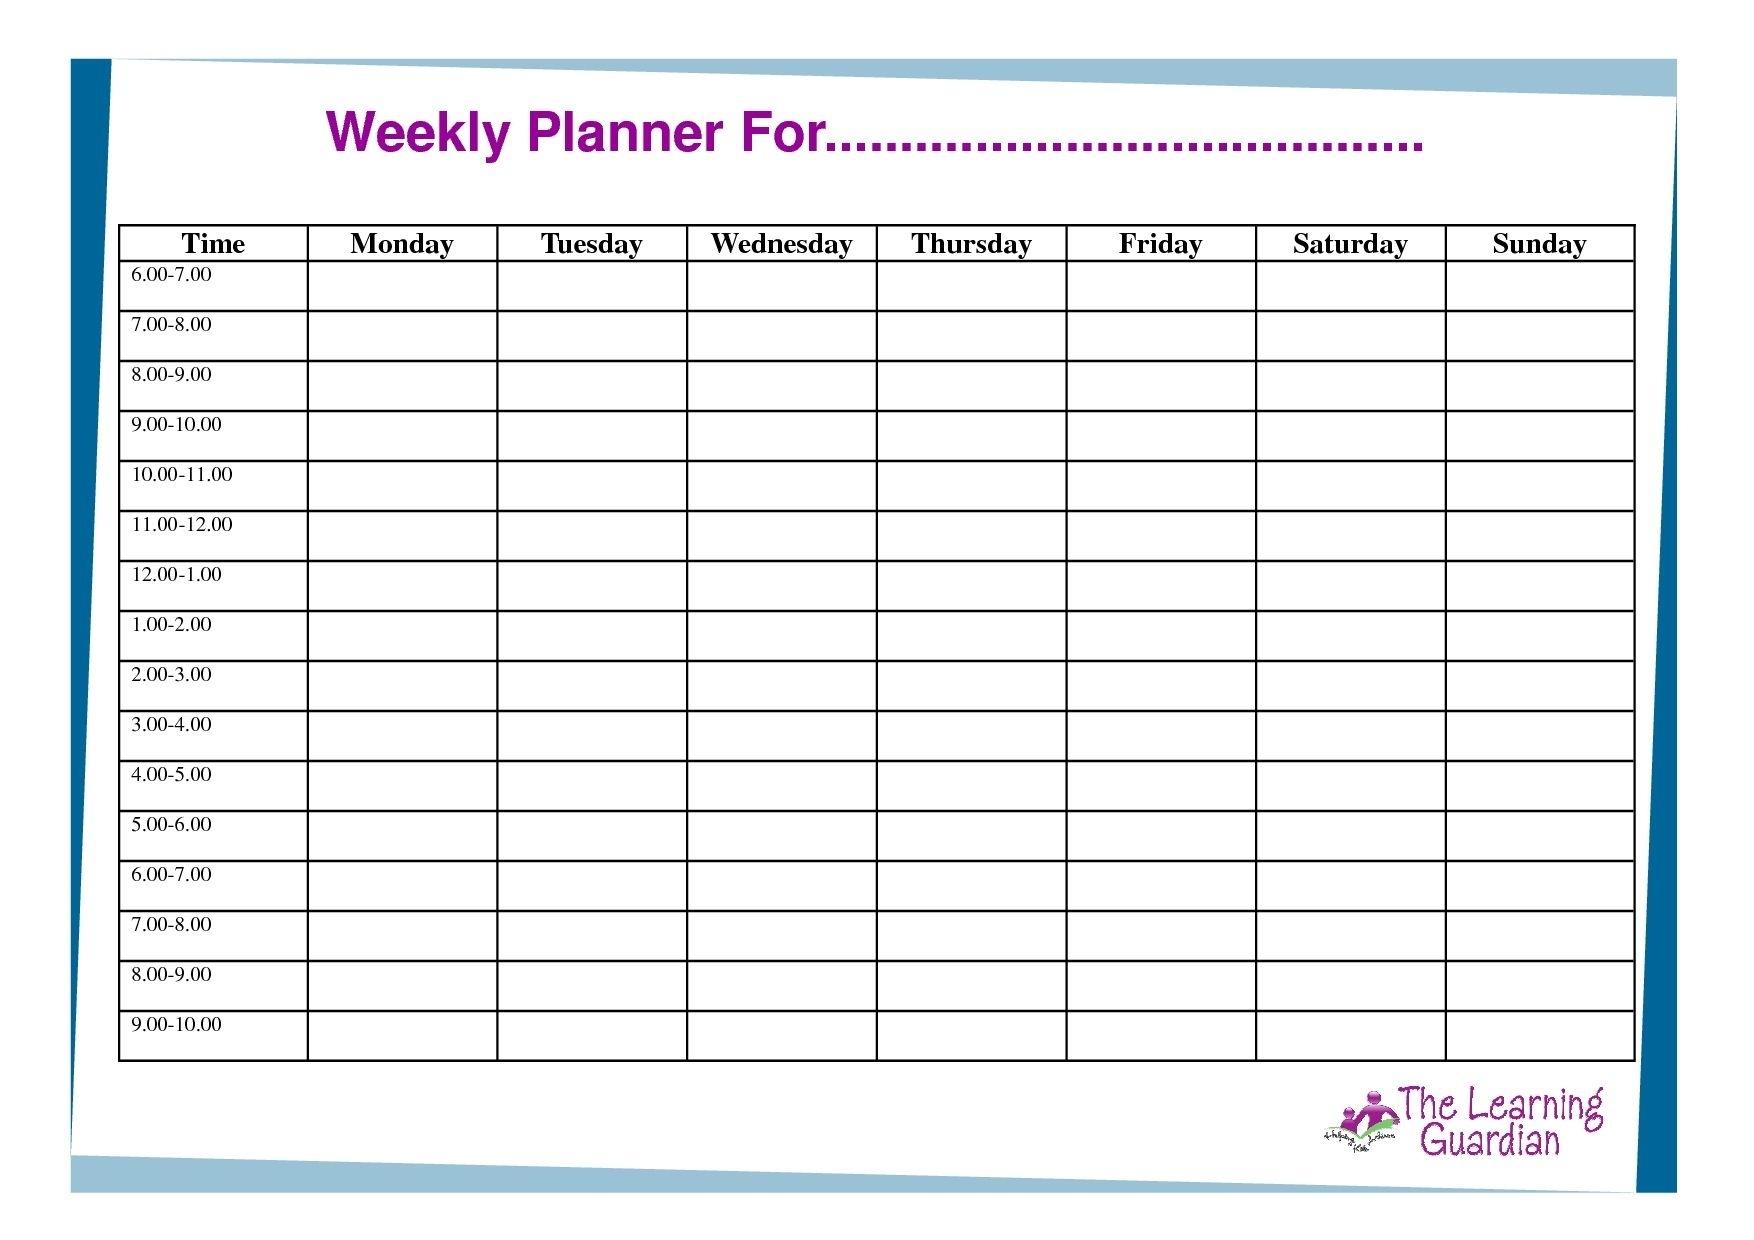 Free Printable Weekly Calendar Templates Weekly Planner For Time pertaining to Free Printable Weekly Calendar Pdf